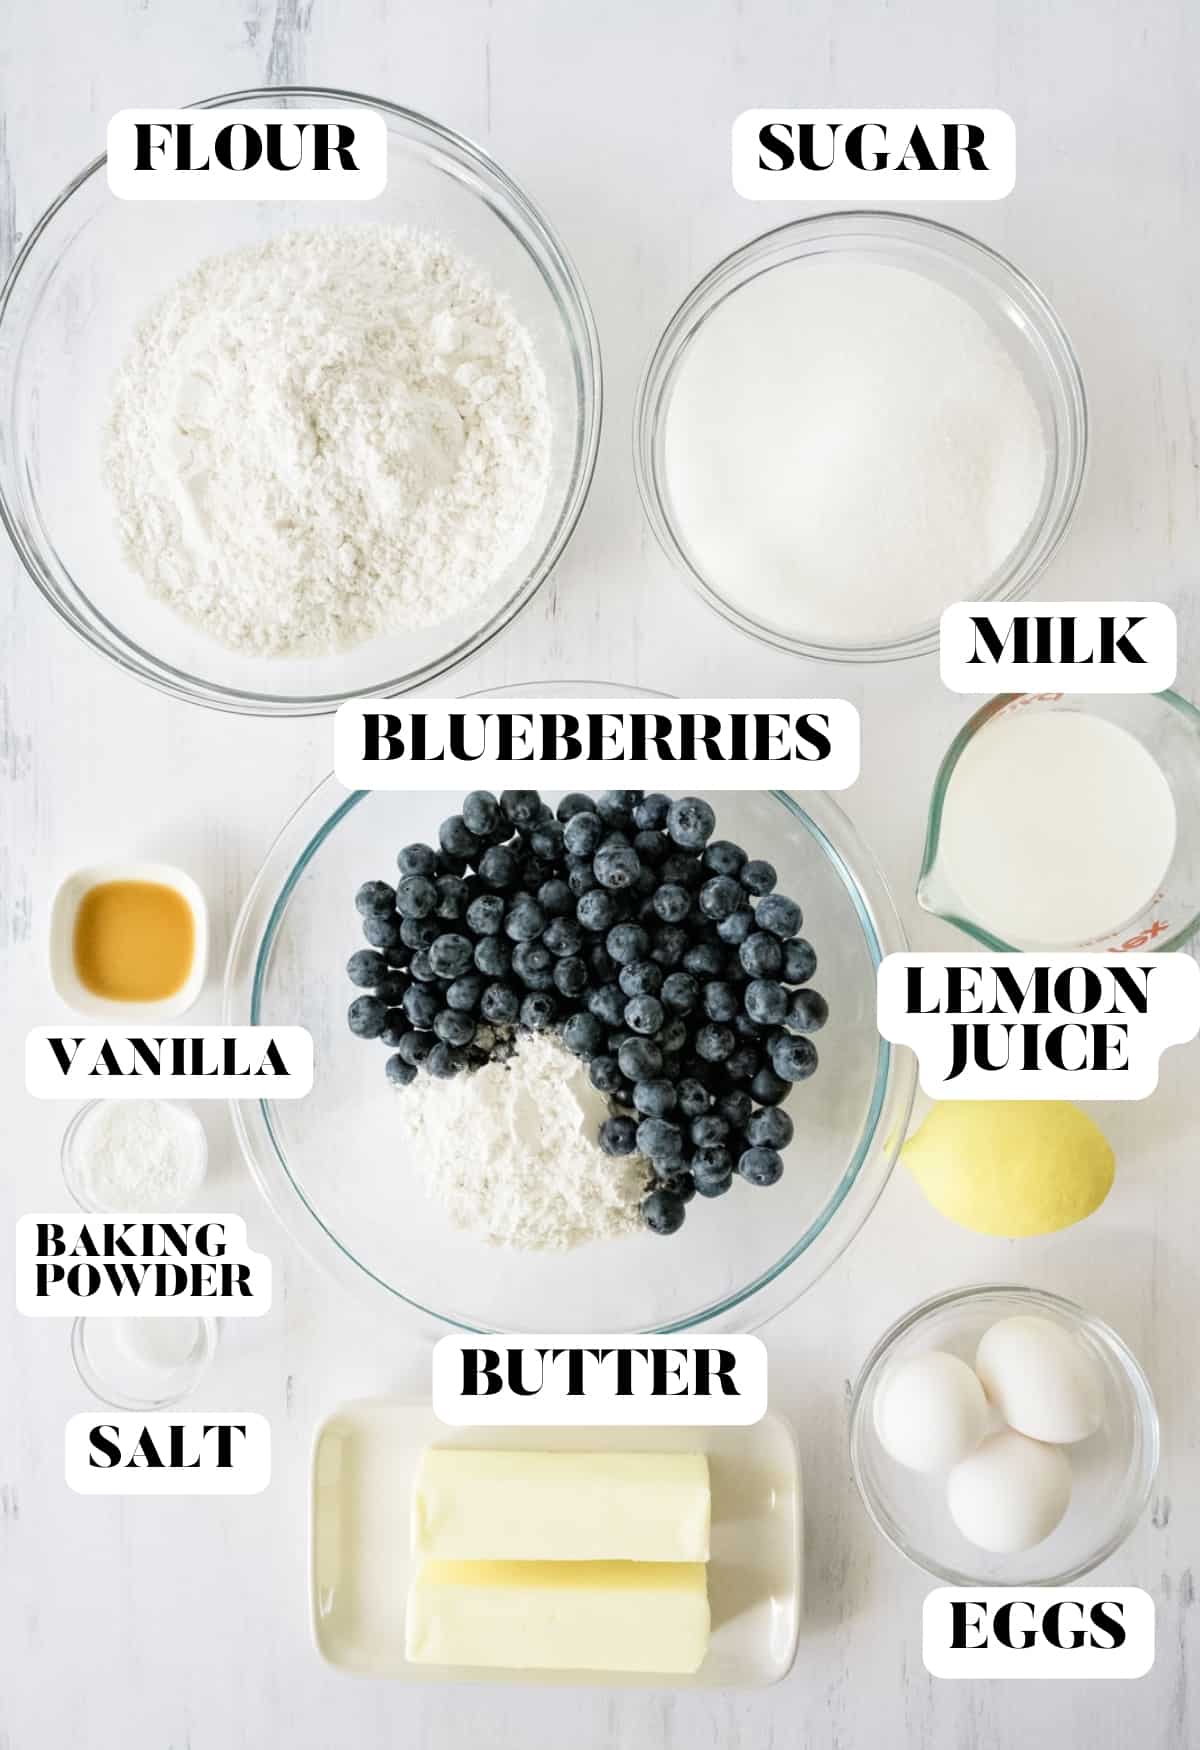 A labeled image of ingredients needed for blueberry pound cake.